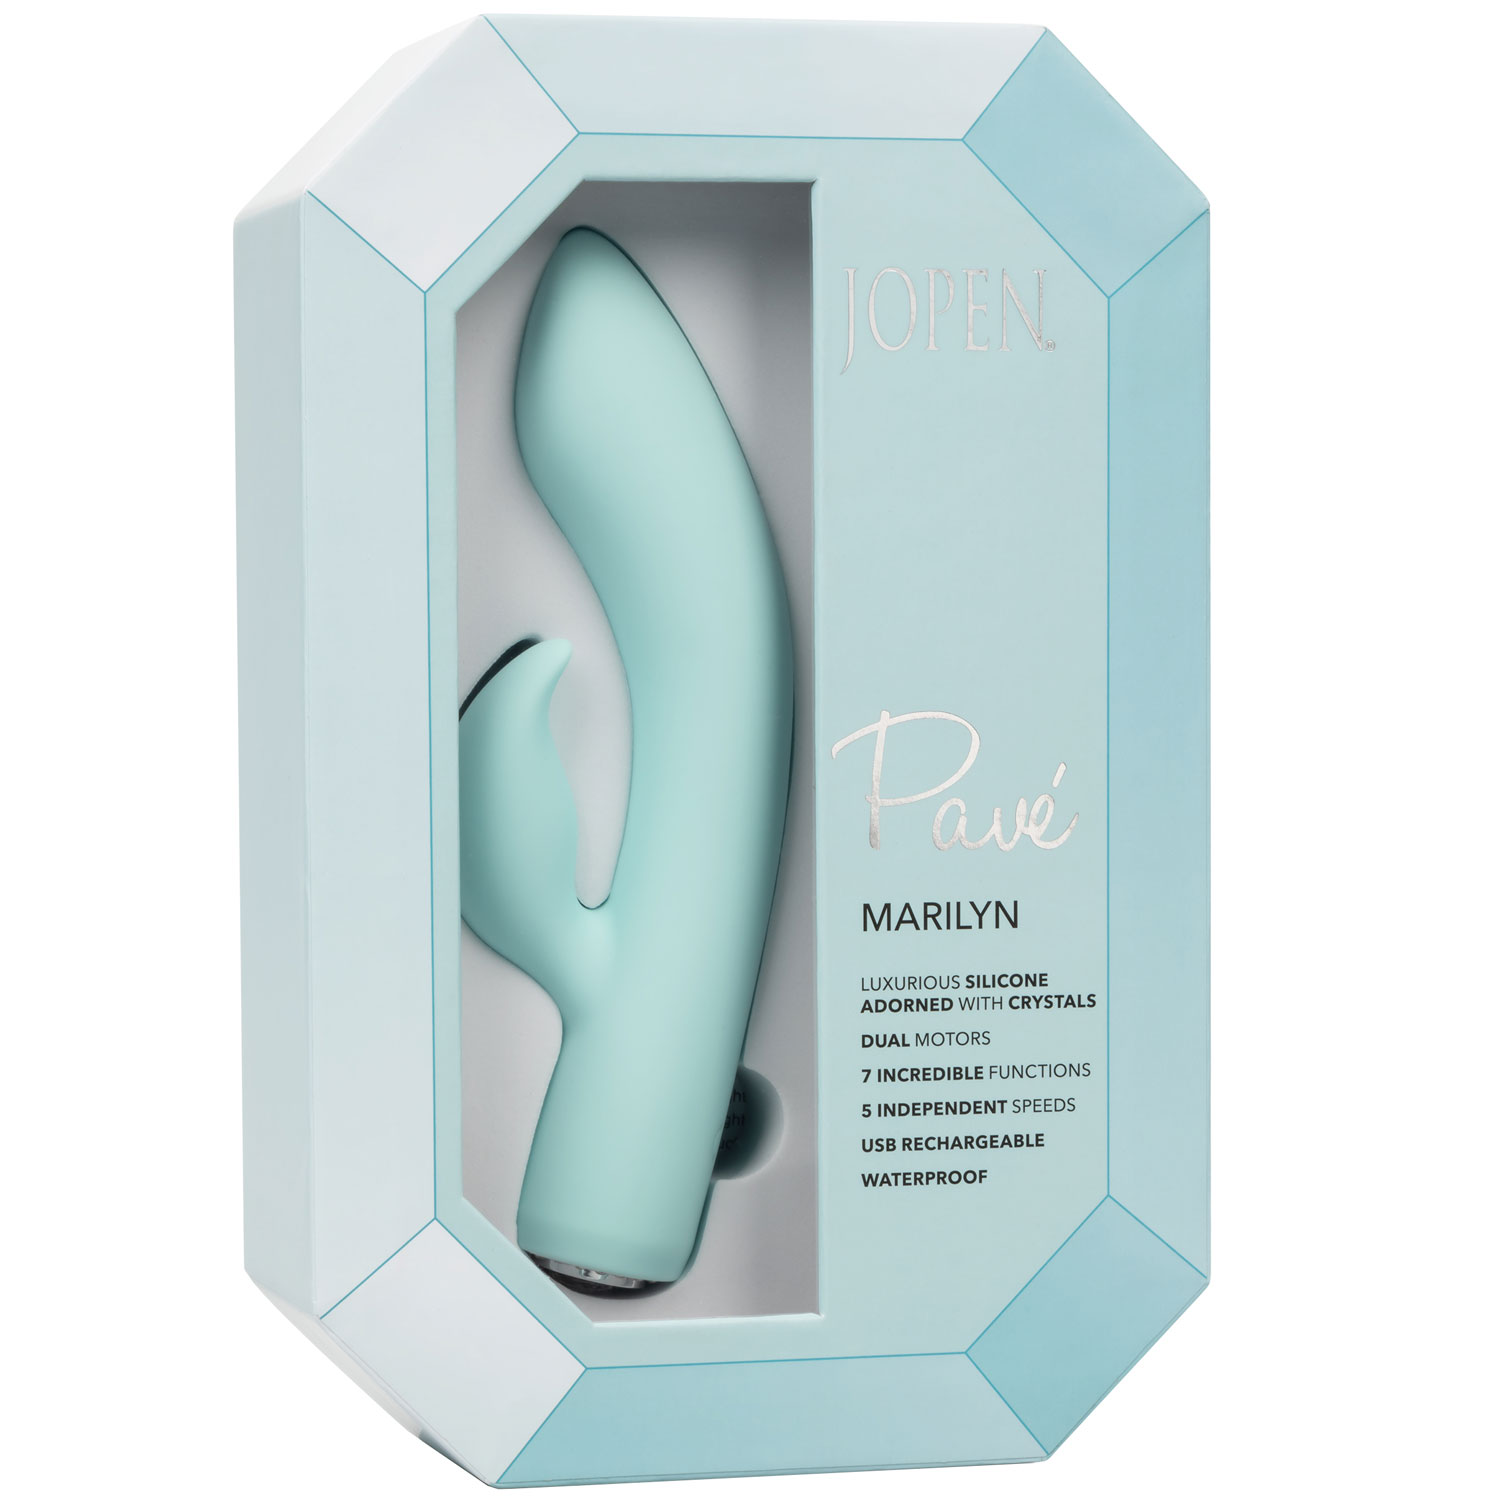 Pave Marilyn Rechargeable Waterproof Silicone Rabbit Style Vibrator By Jopen - Package